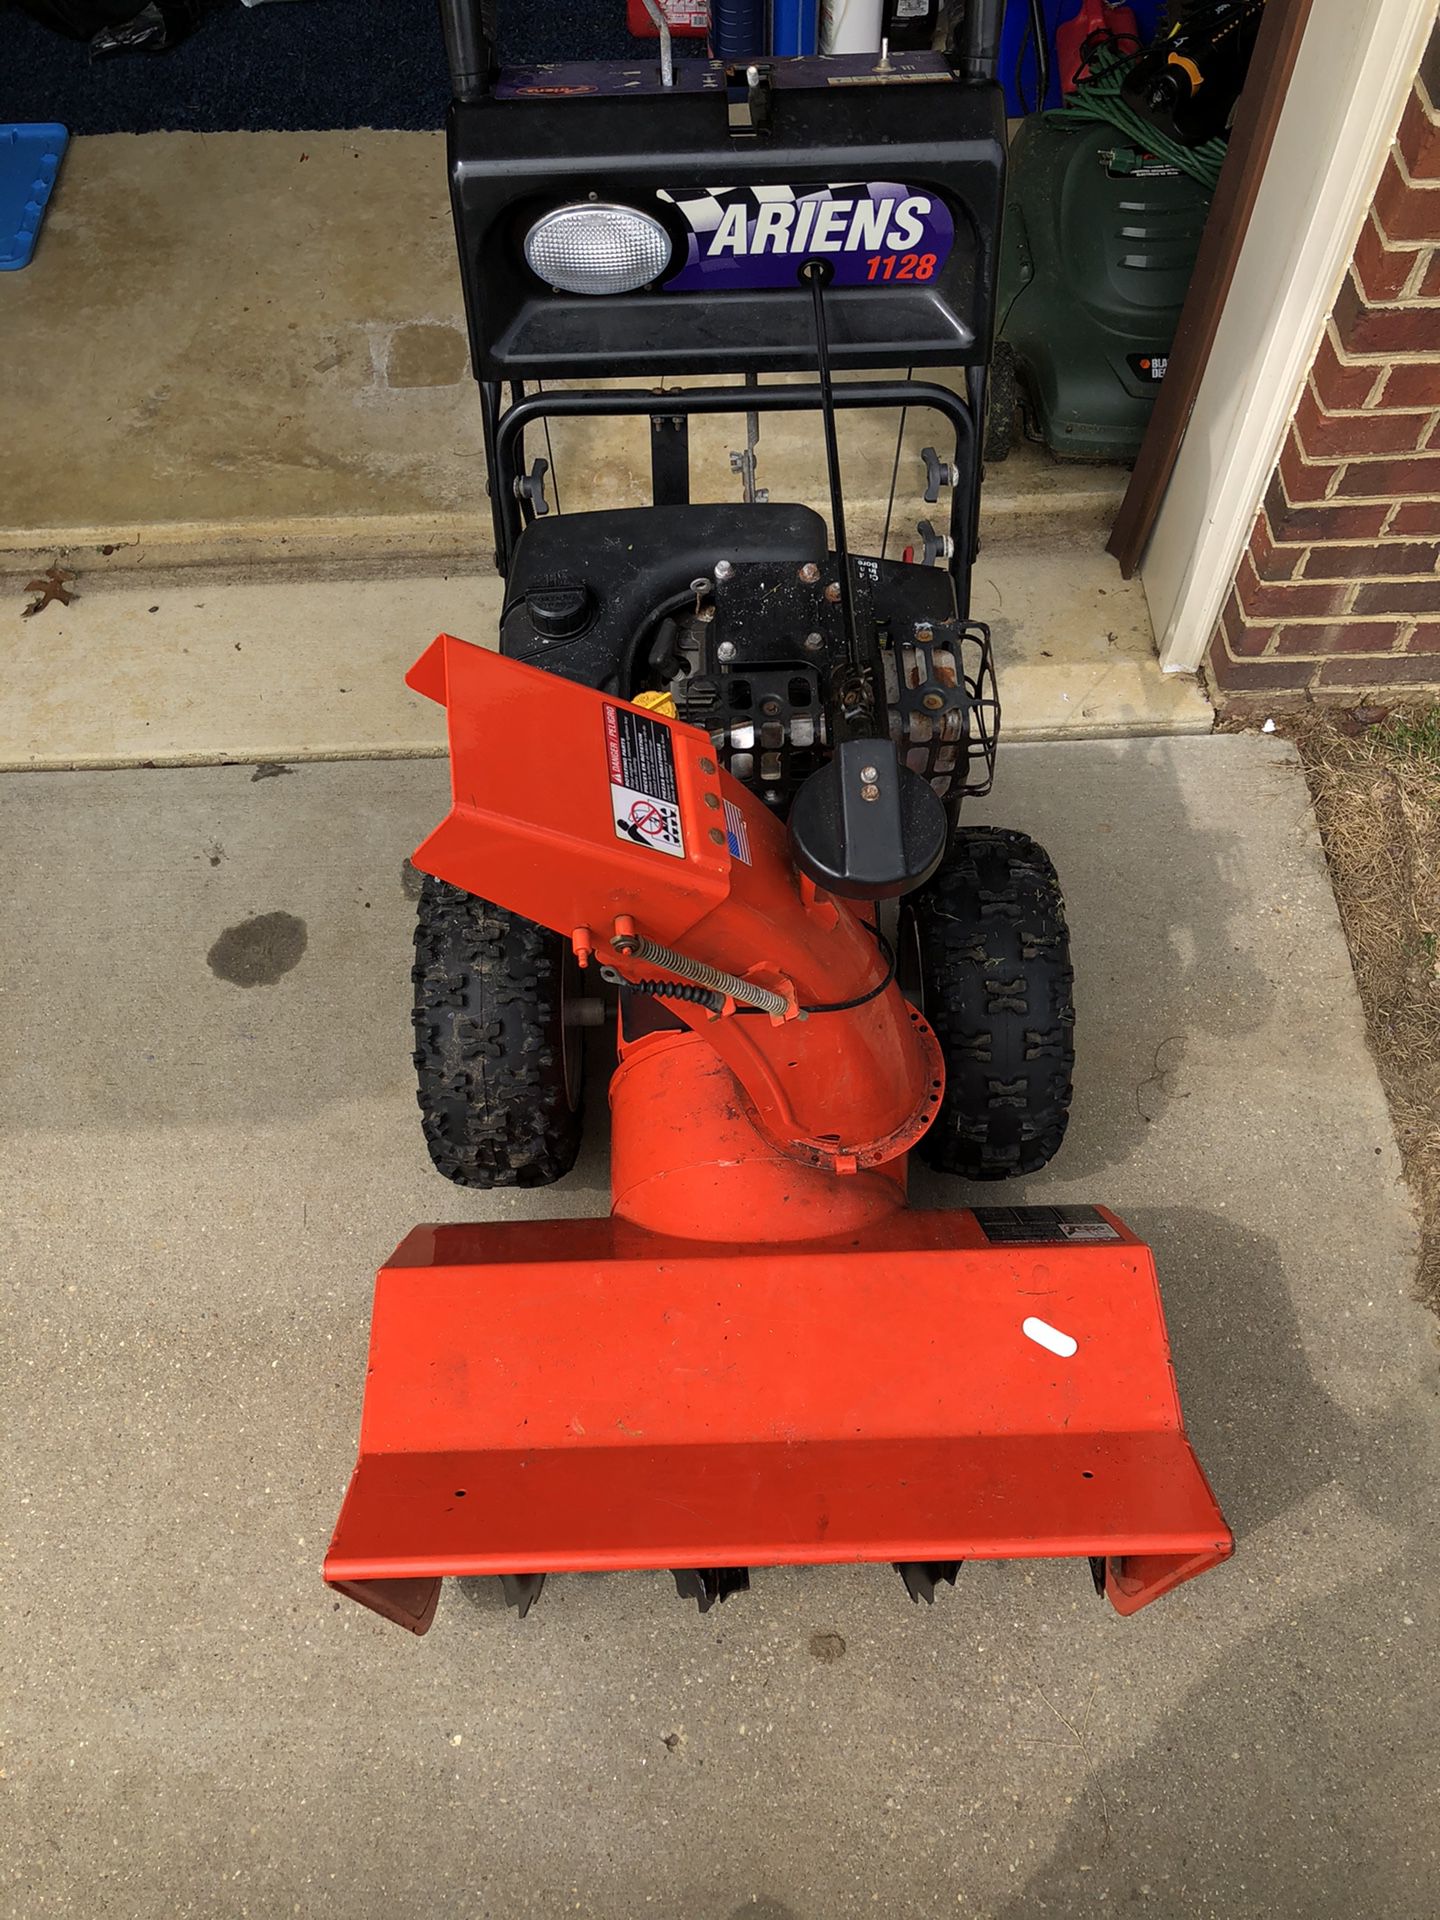 Ariens 1128 Snow Blower And Western 76” Pro Plow For Sale In Saint